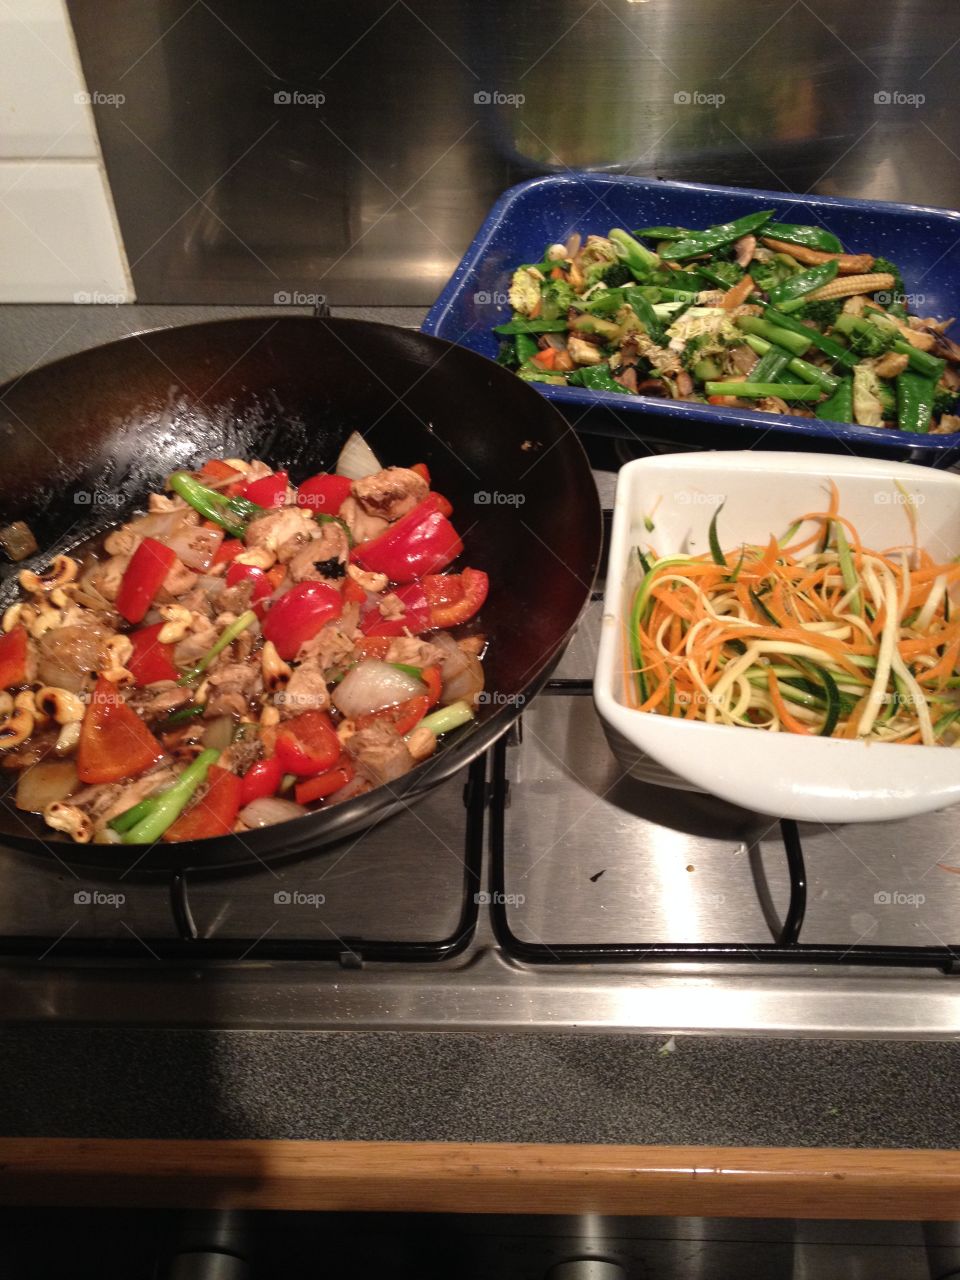 Chinese feast for one or two. 
Chicken and red pepper stirfry with cashews, Asian  style lemon and vegetable noodle salad, vegetable stirfry. 